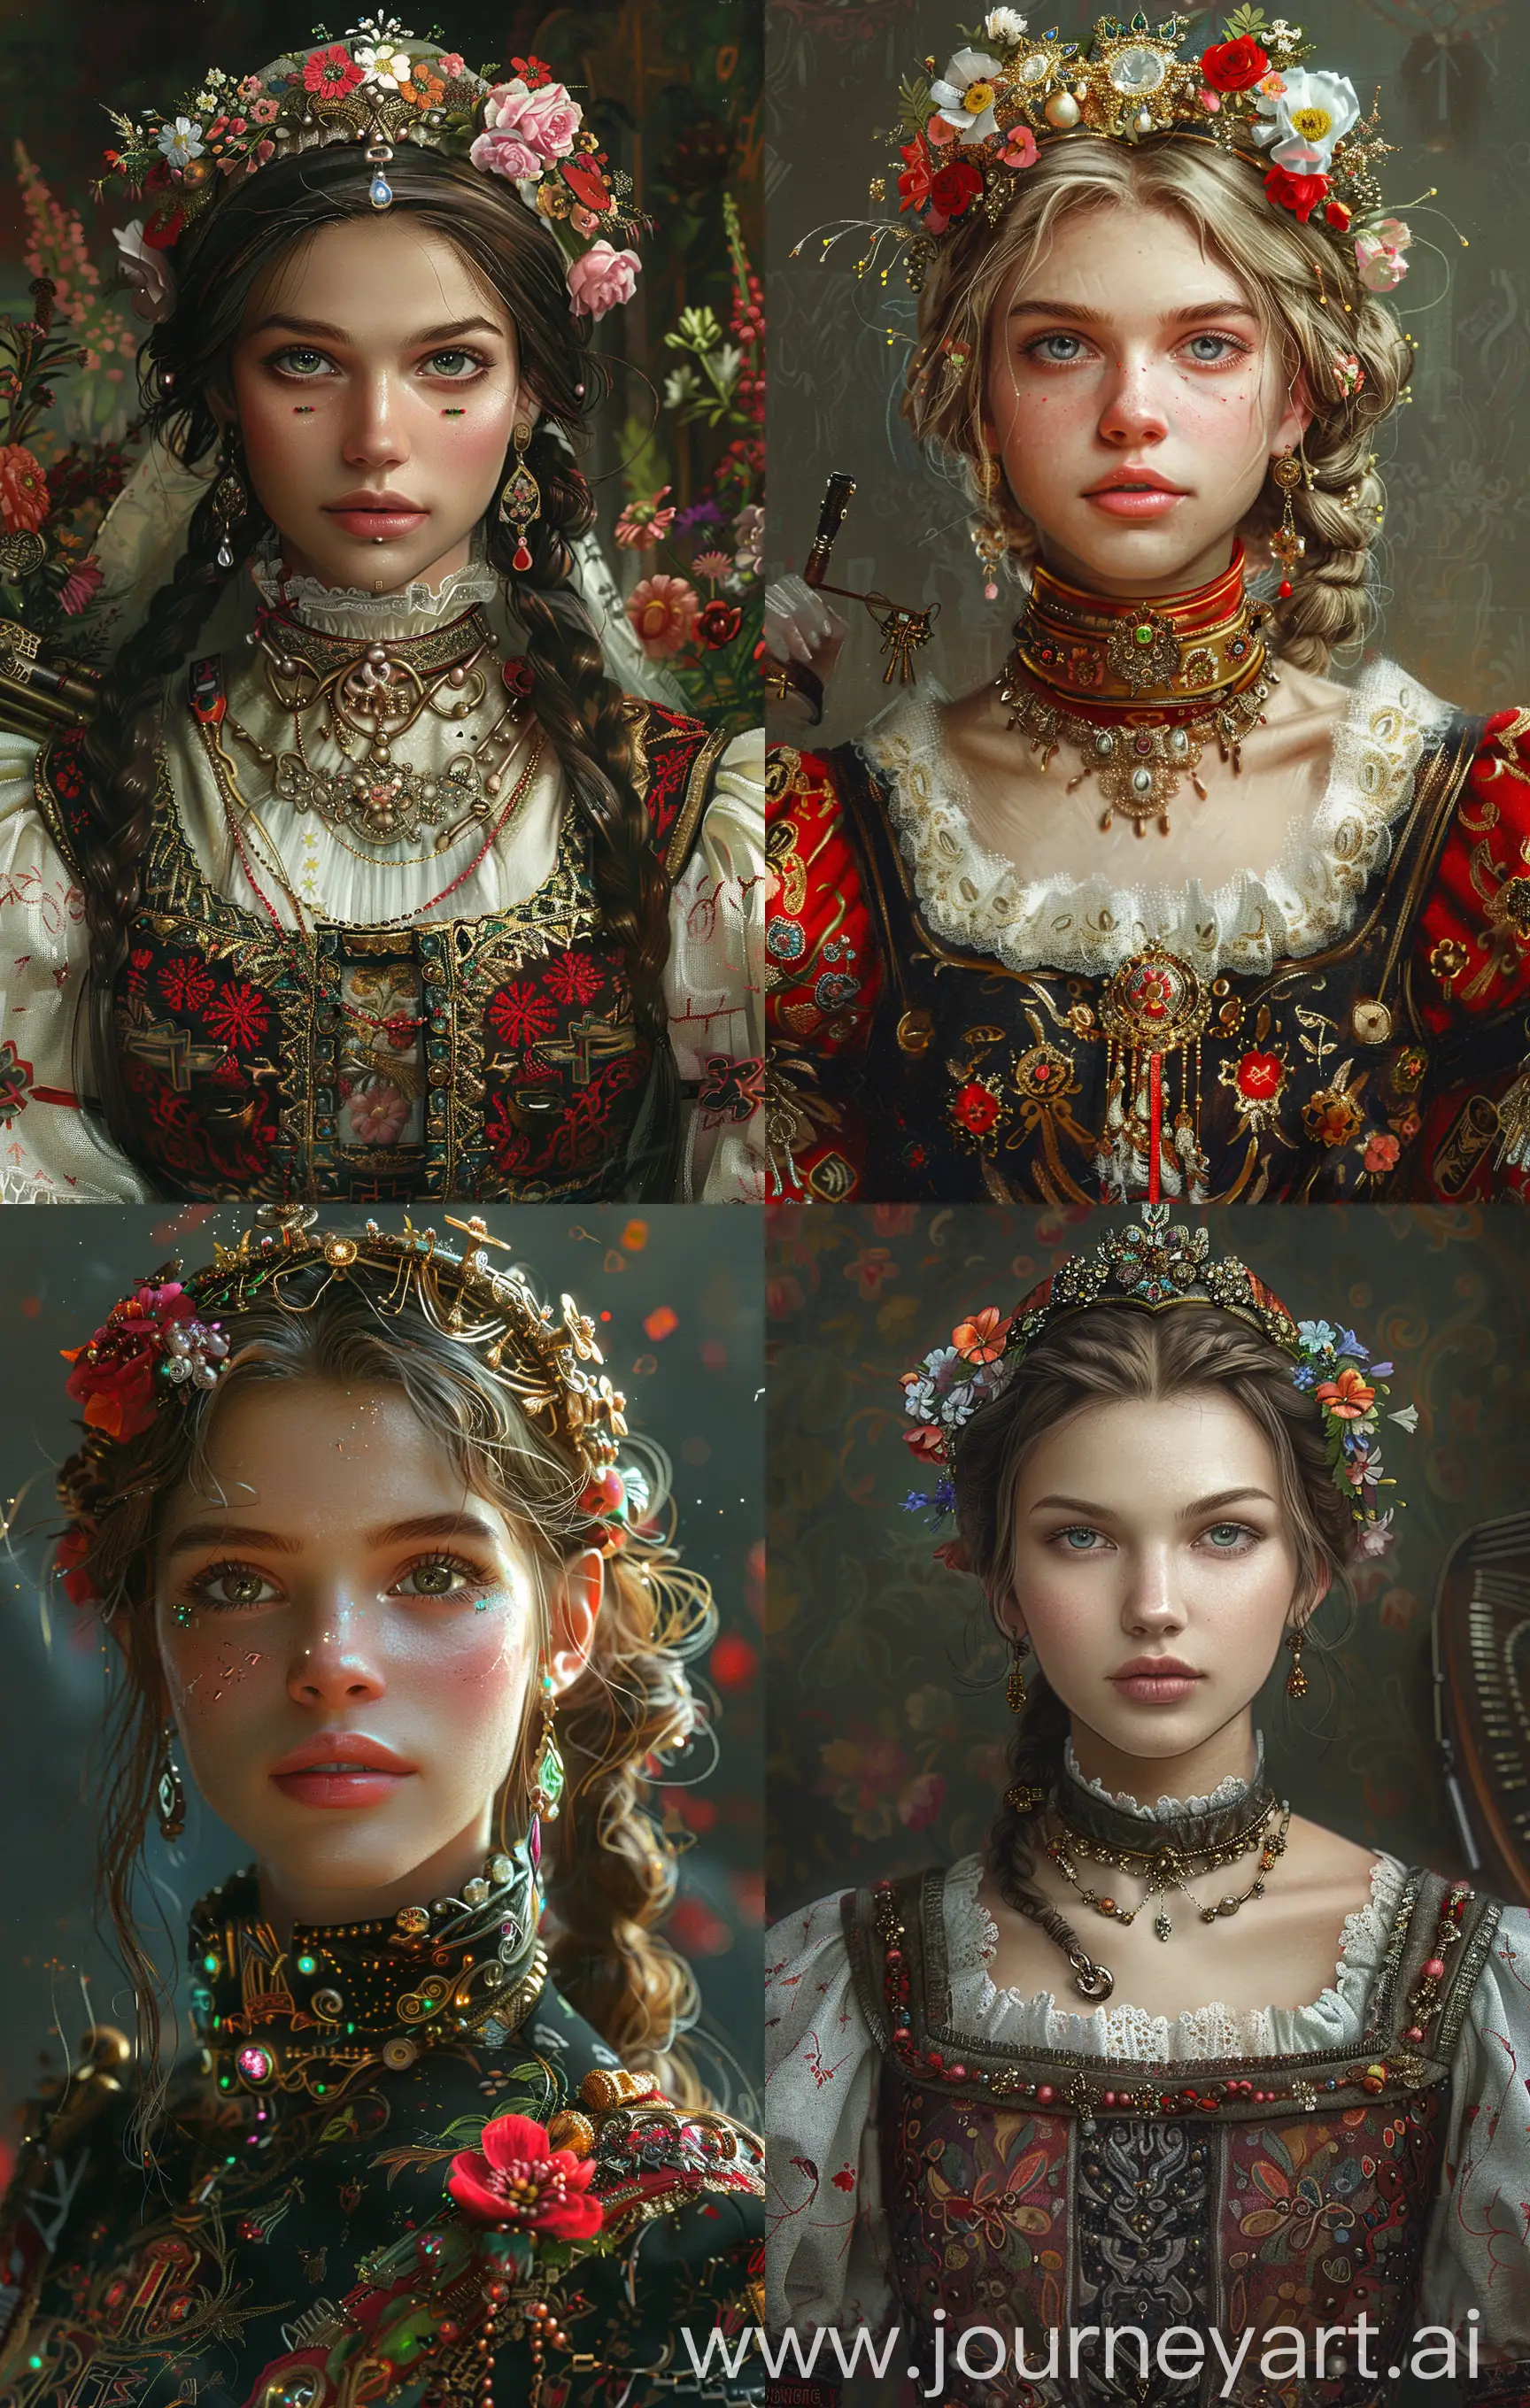 Cyberpunk-Slavic-Cyberfemale-in-Traditional-Dress-with-Flowers-Tiara-and-Music-Cyberinstruments